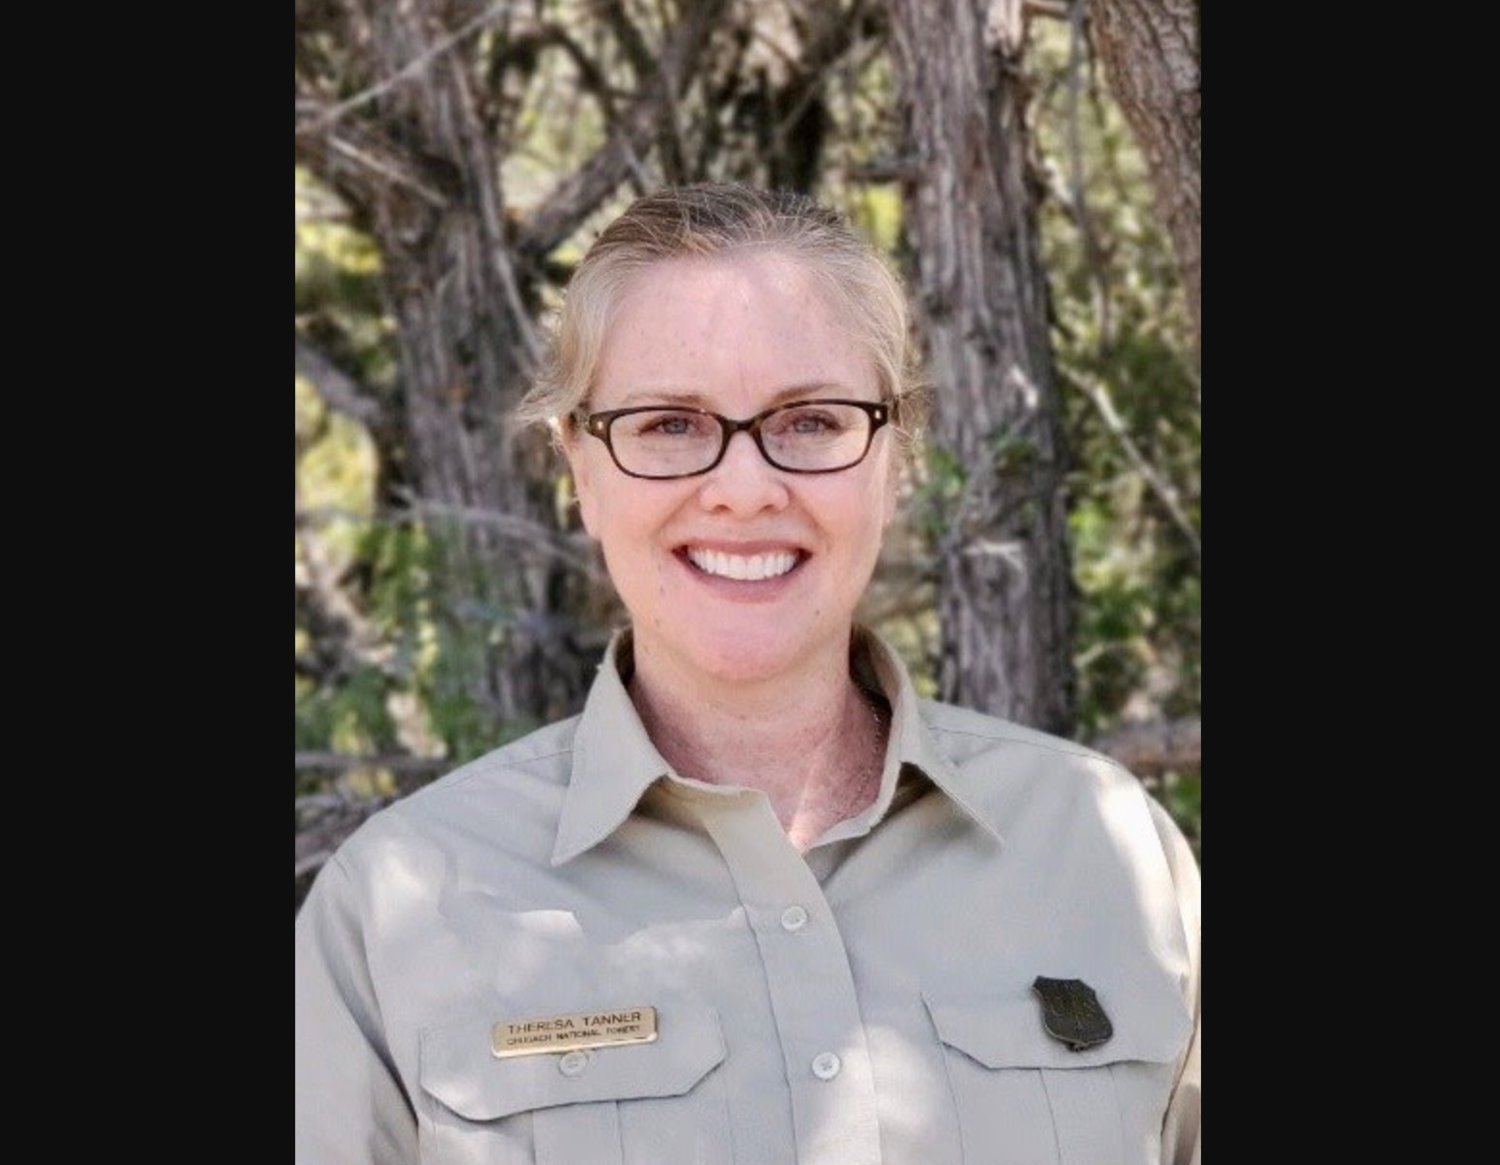 Theresa Tanner, district ranger for the Cowlitz Valley District based in Randle.